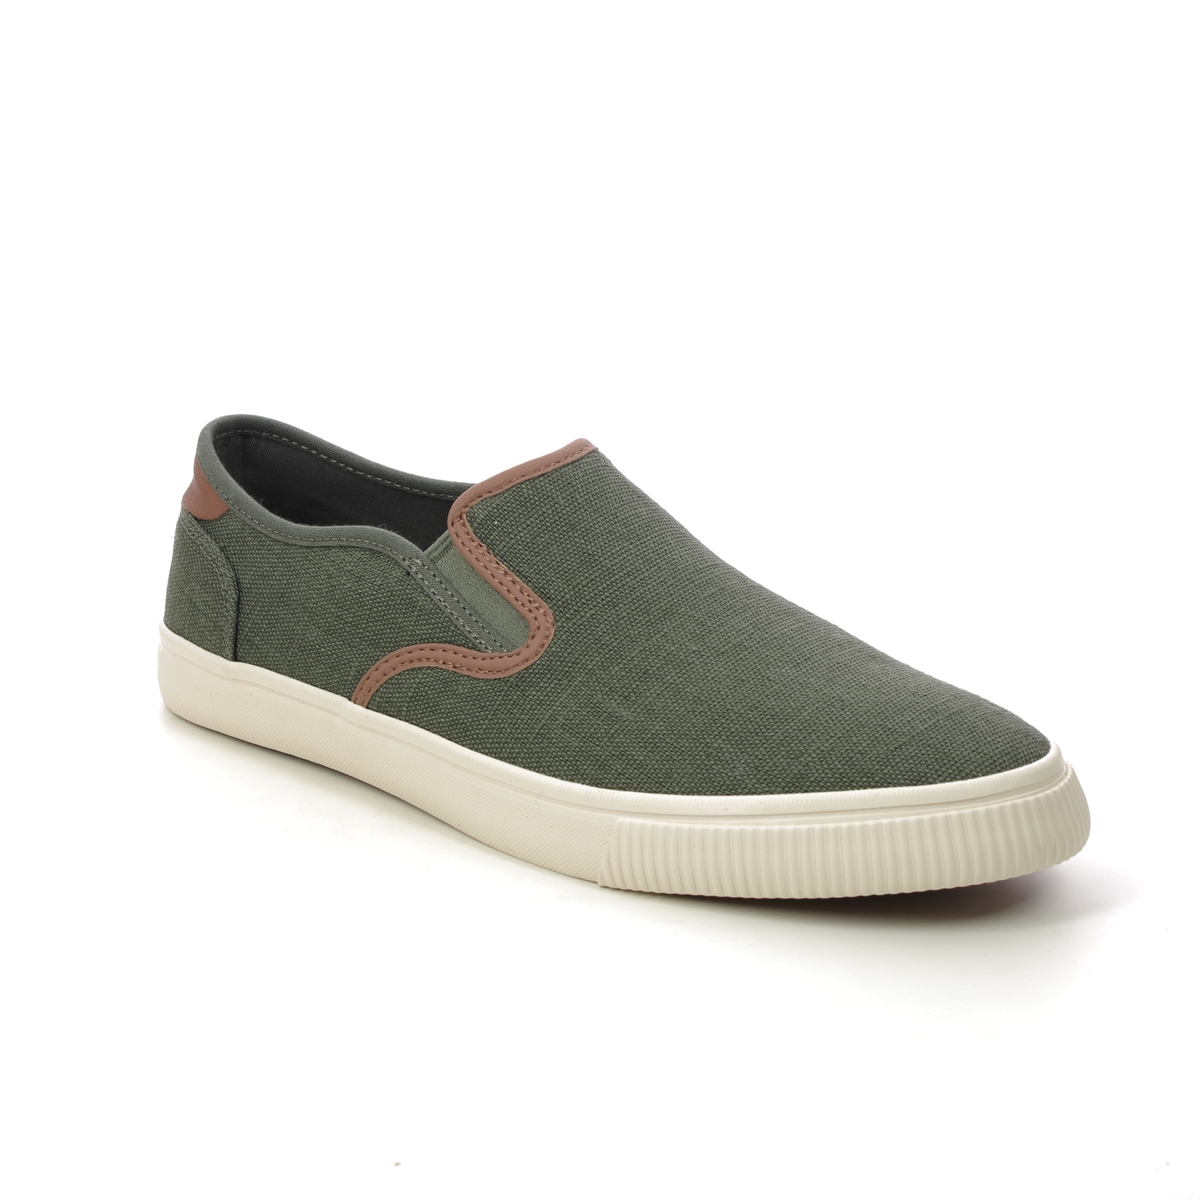 Toms Baja Khaki Mens Slip-on Shoes 10020836- in a Plain Canvas in Size 11